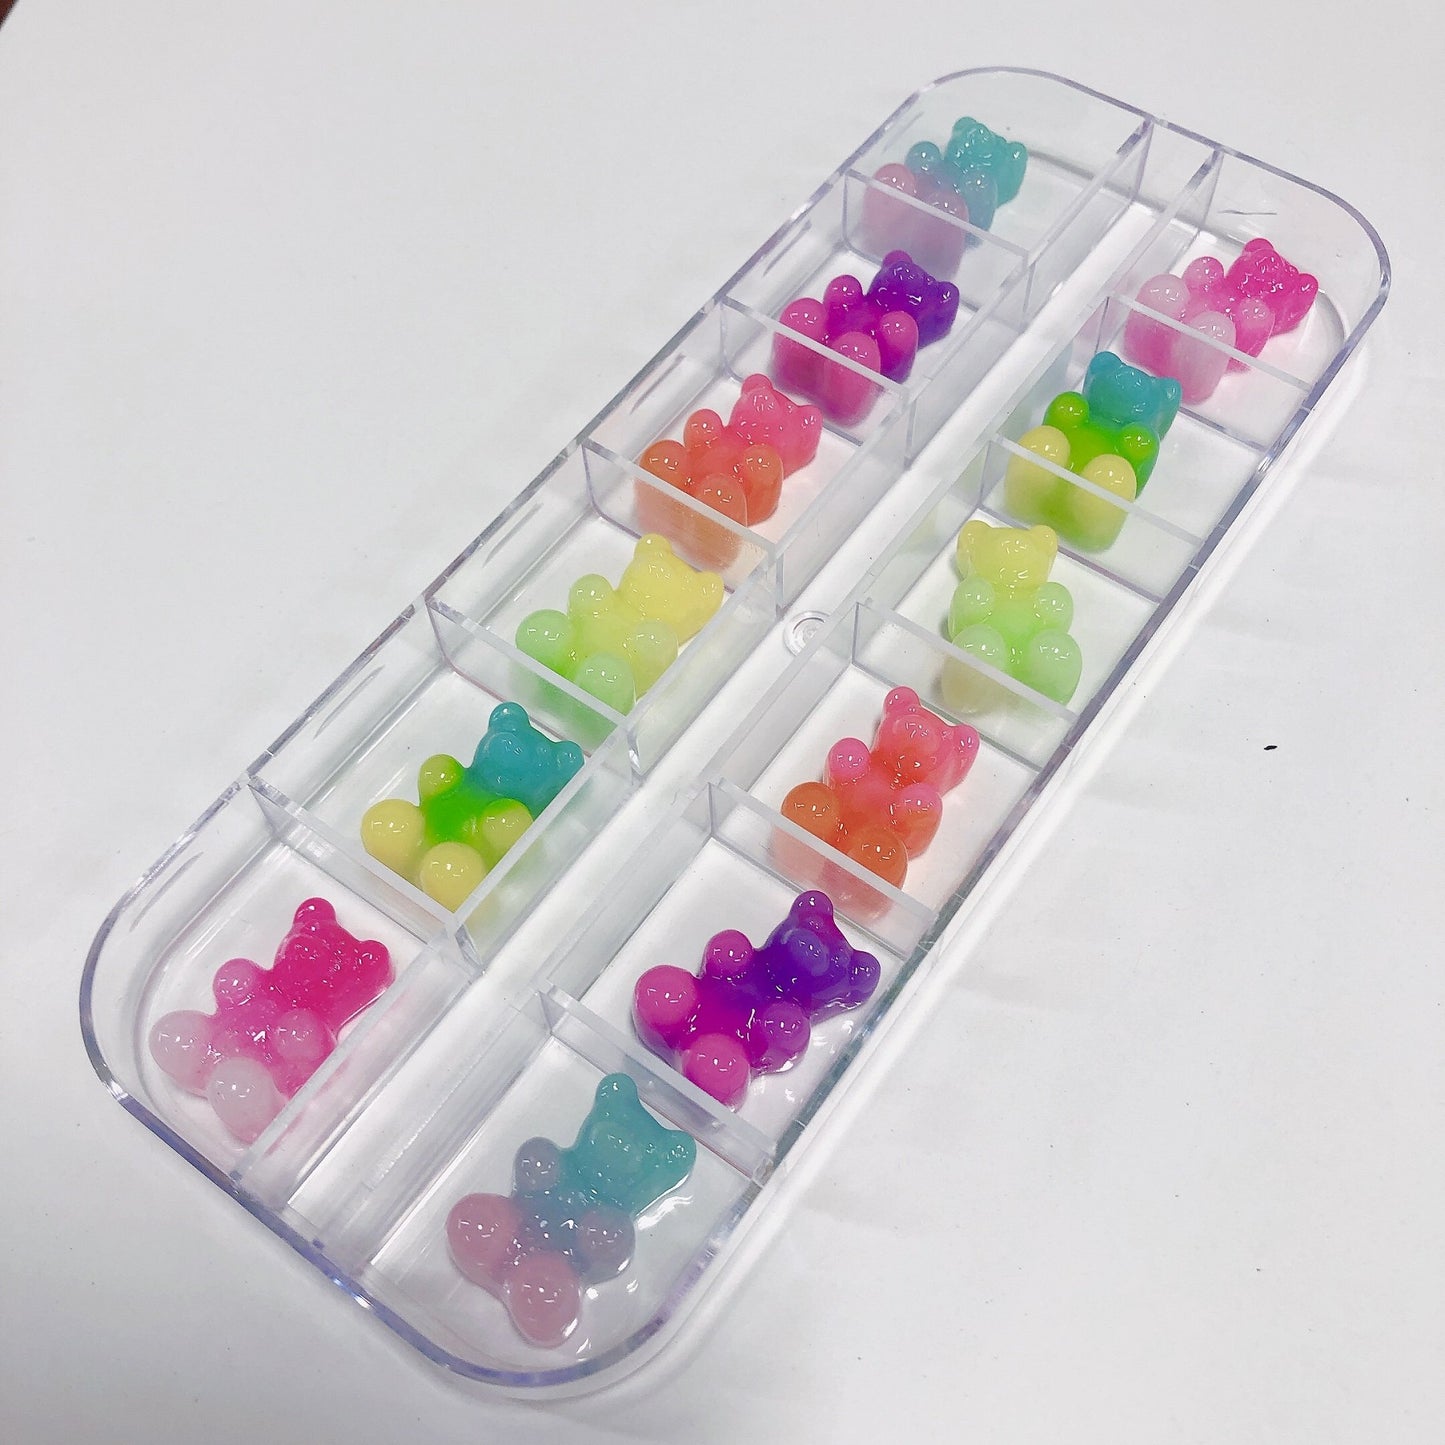 Kawaii Charms - 3D Gummy Bear for Nail Decoration  12 colors of 3D Gummy Bears mix in one box.